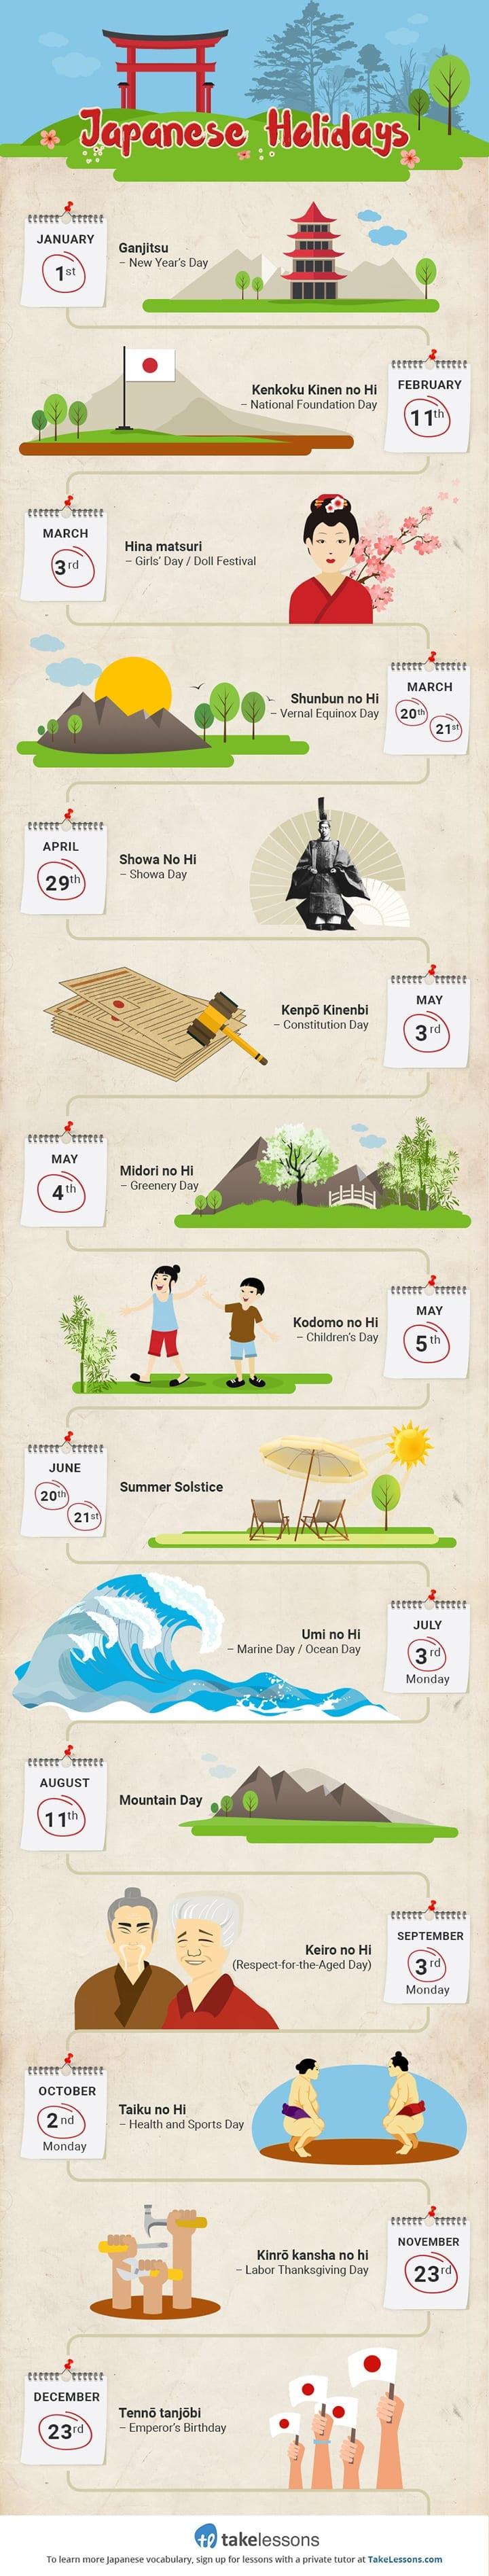 https://takelessons.com/blog/2015/09/12-japanese-holidays-and-celebrations-infographic